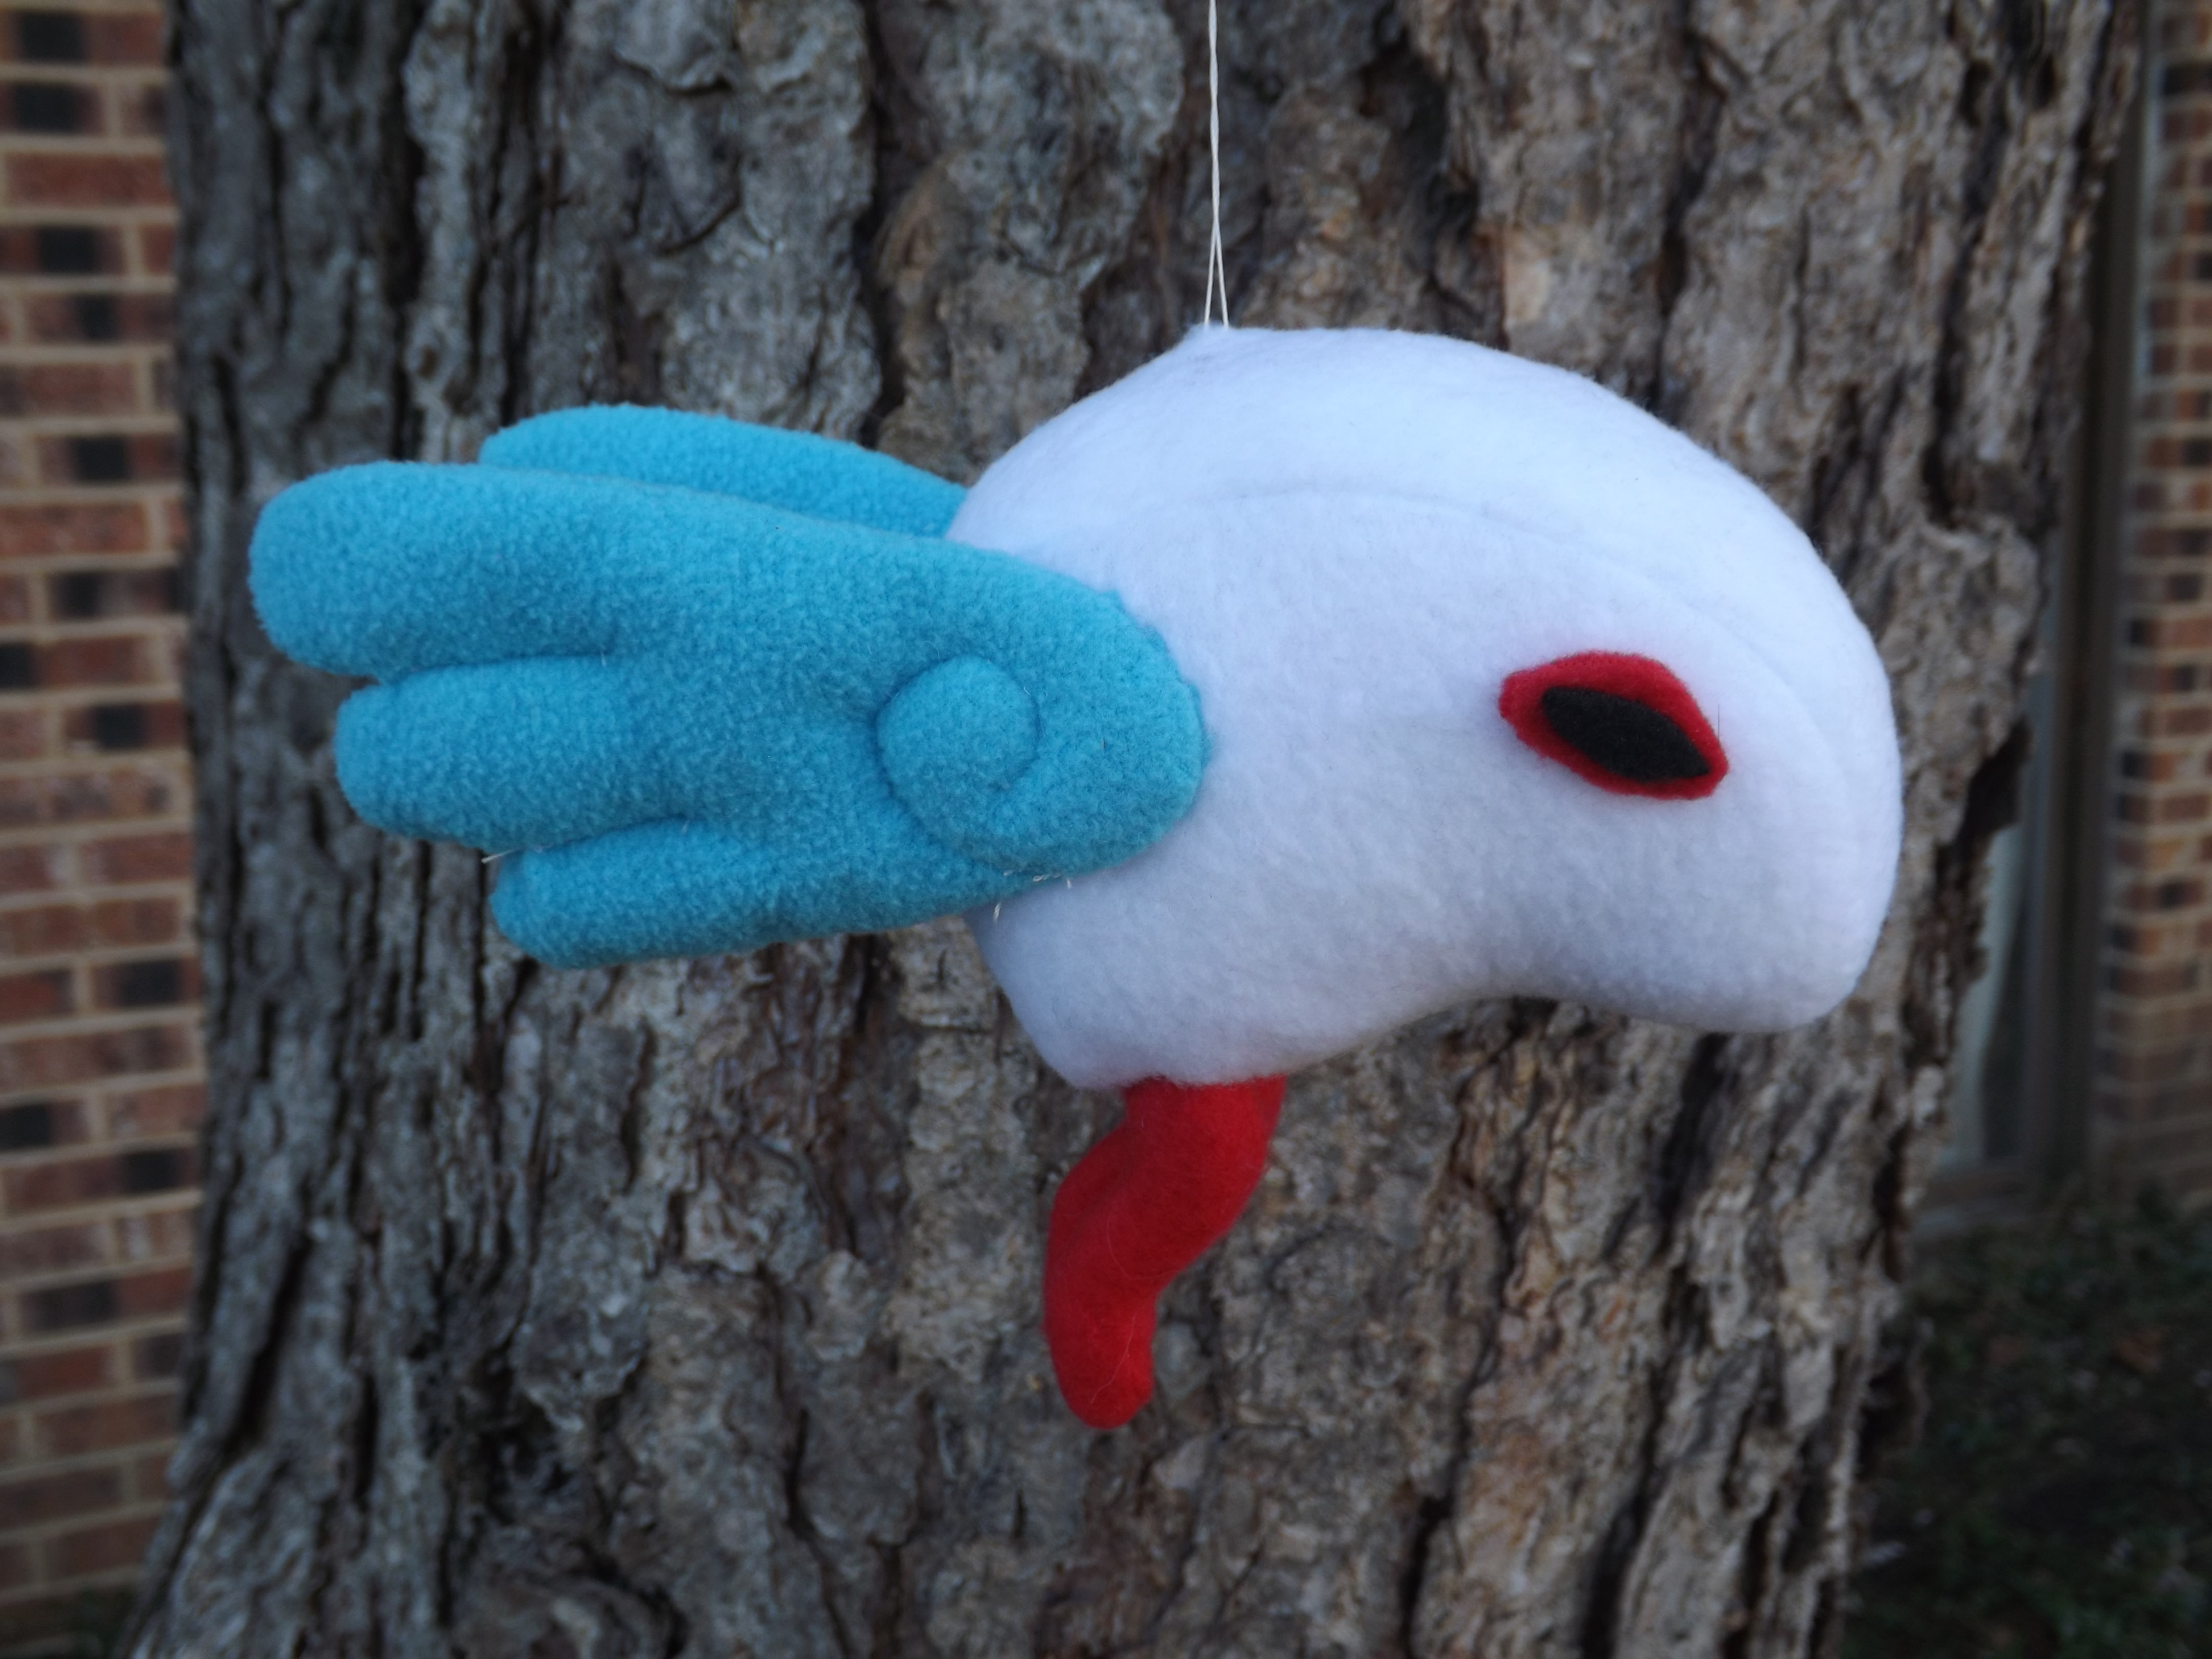 A photo of the finished Sheerow plush from the side.